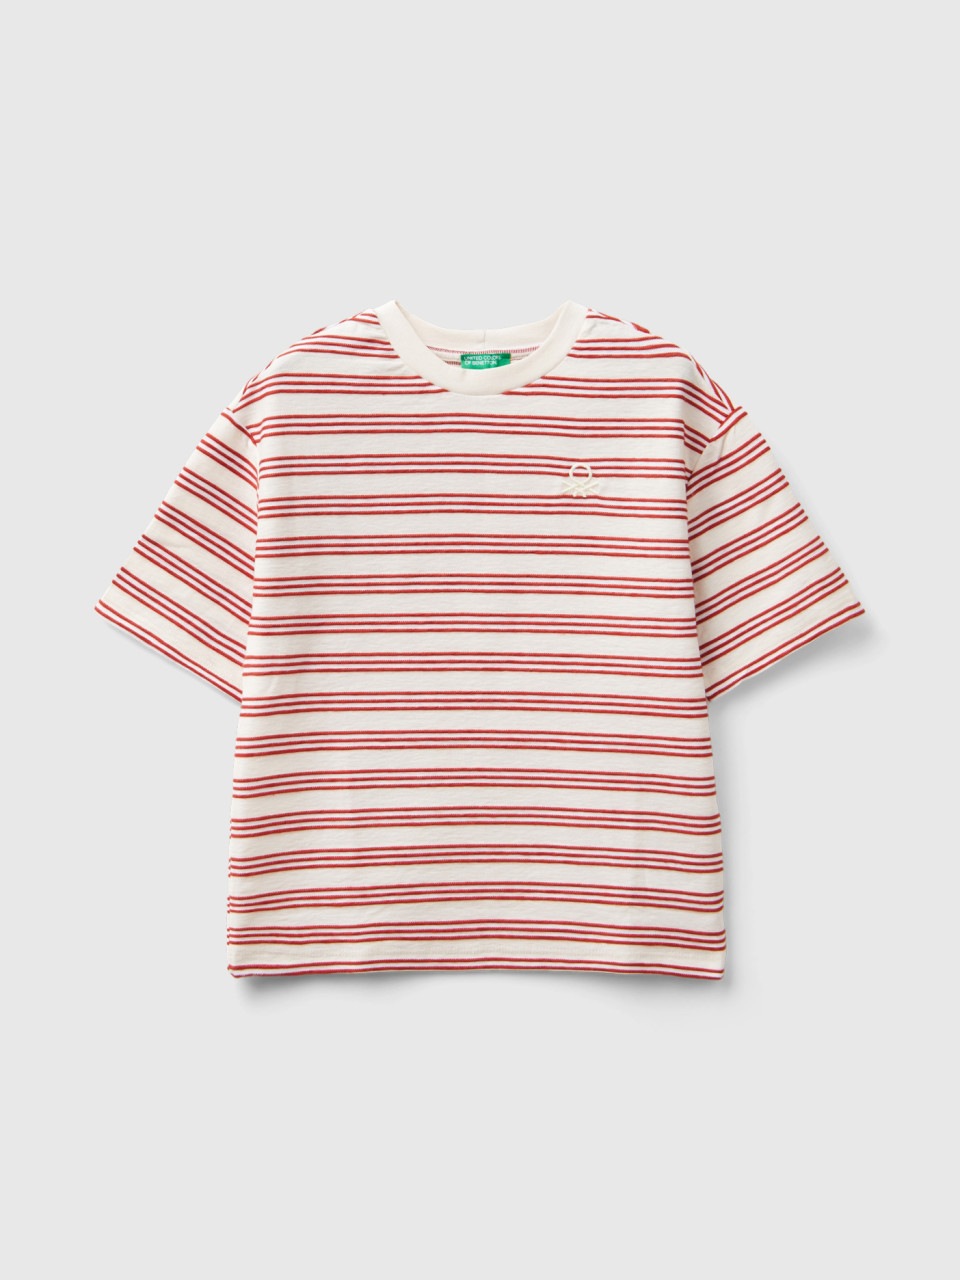 Benetton, T-shirt A Righe Over Fit, Bianco Panna, Bambini